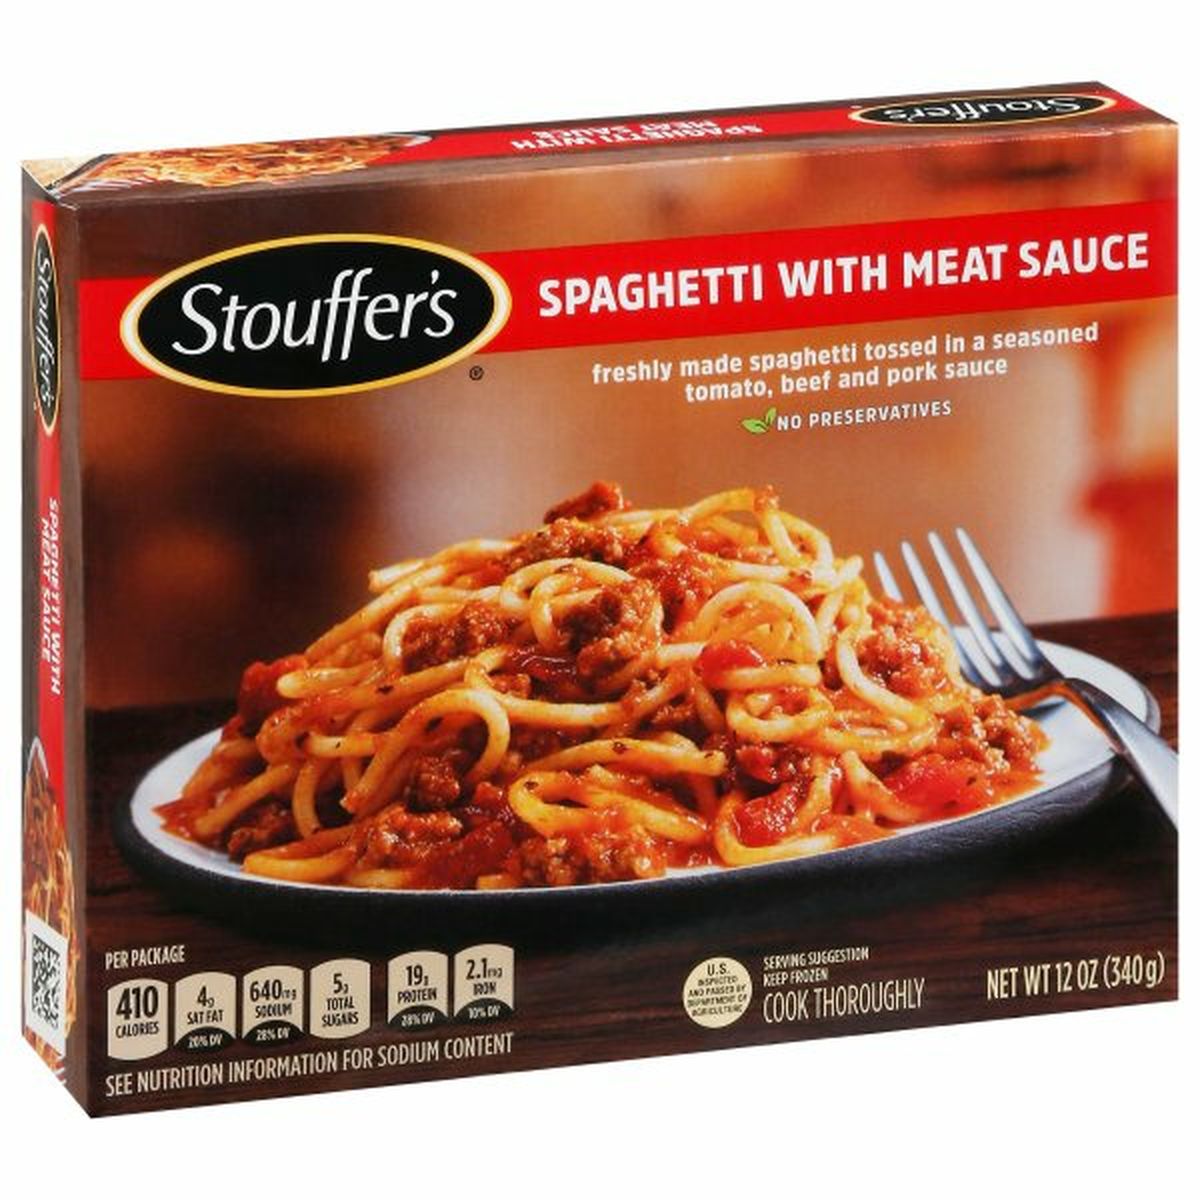 Calories in Stouffer's Spaghetti with Meat Sauce